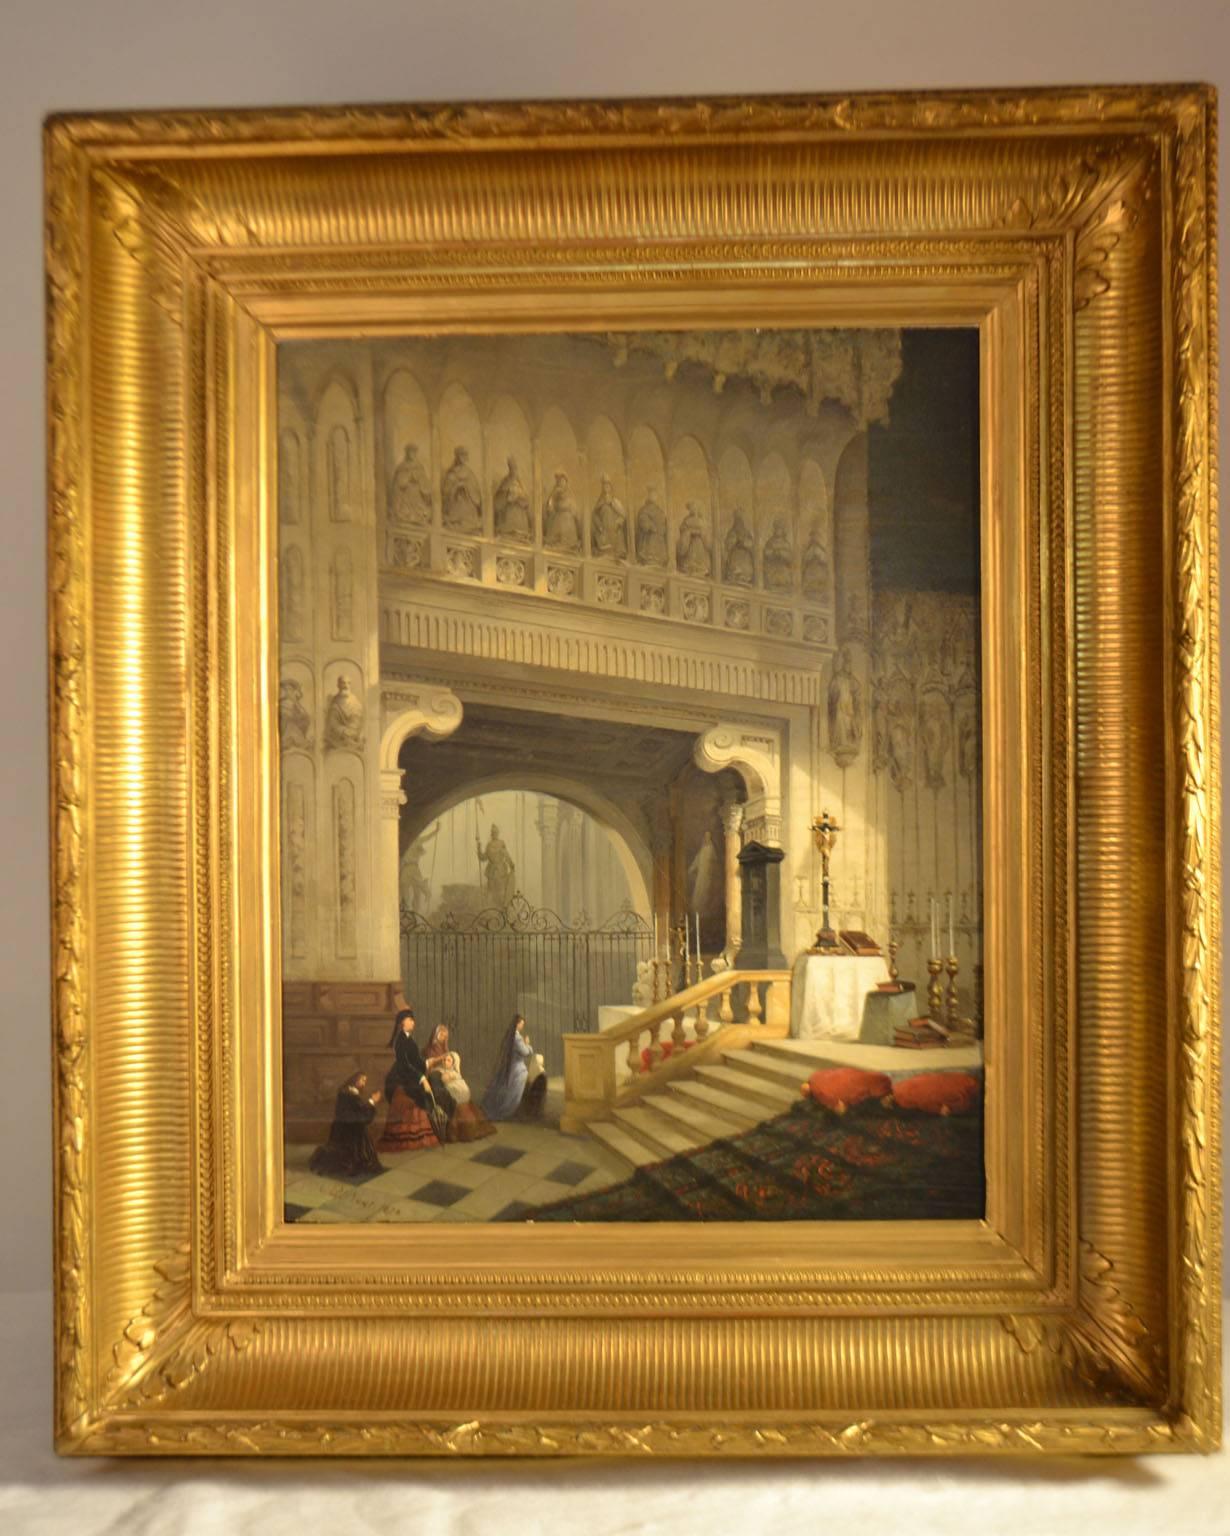 Framed oil painting on canvas by Bernard Neyt from Belgian (1825-1880). Neyt exclusively painted the interior of churches. This painting is signed and dated B. Neyt 1878.